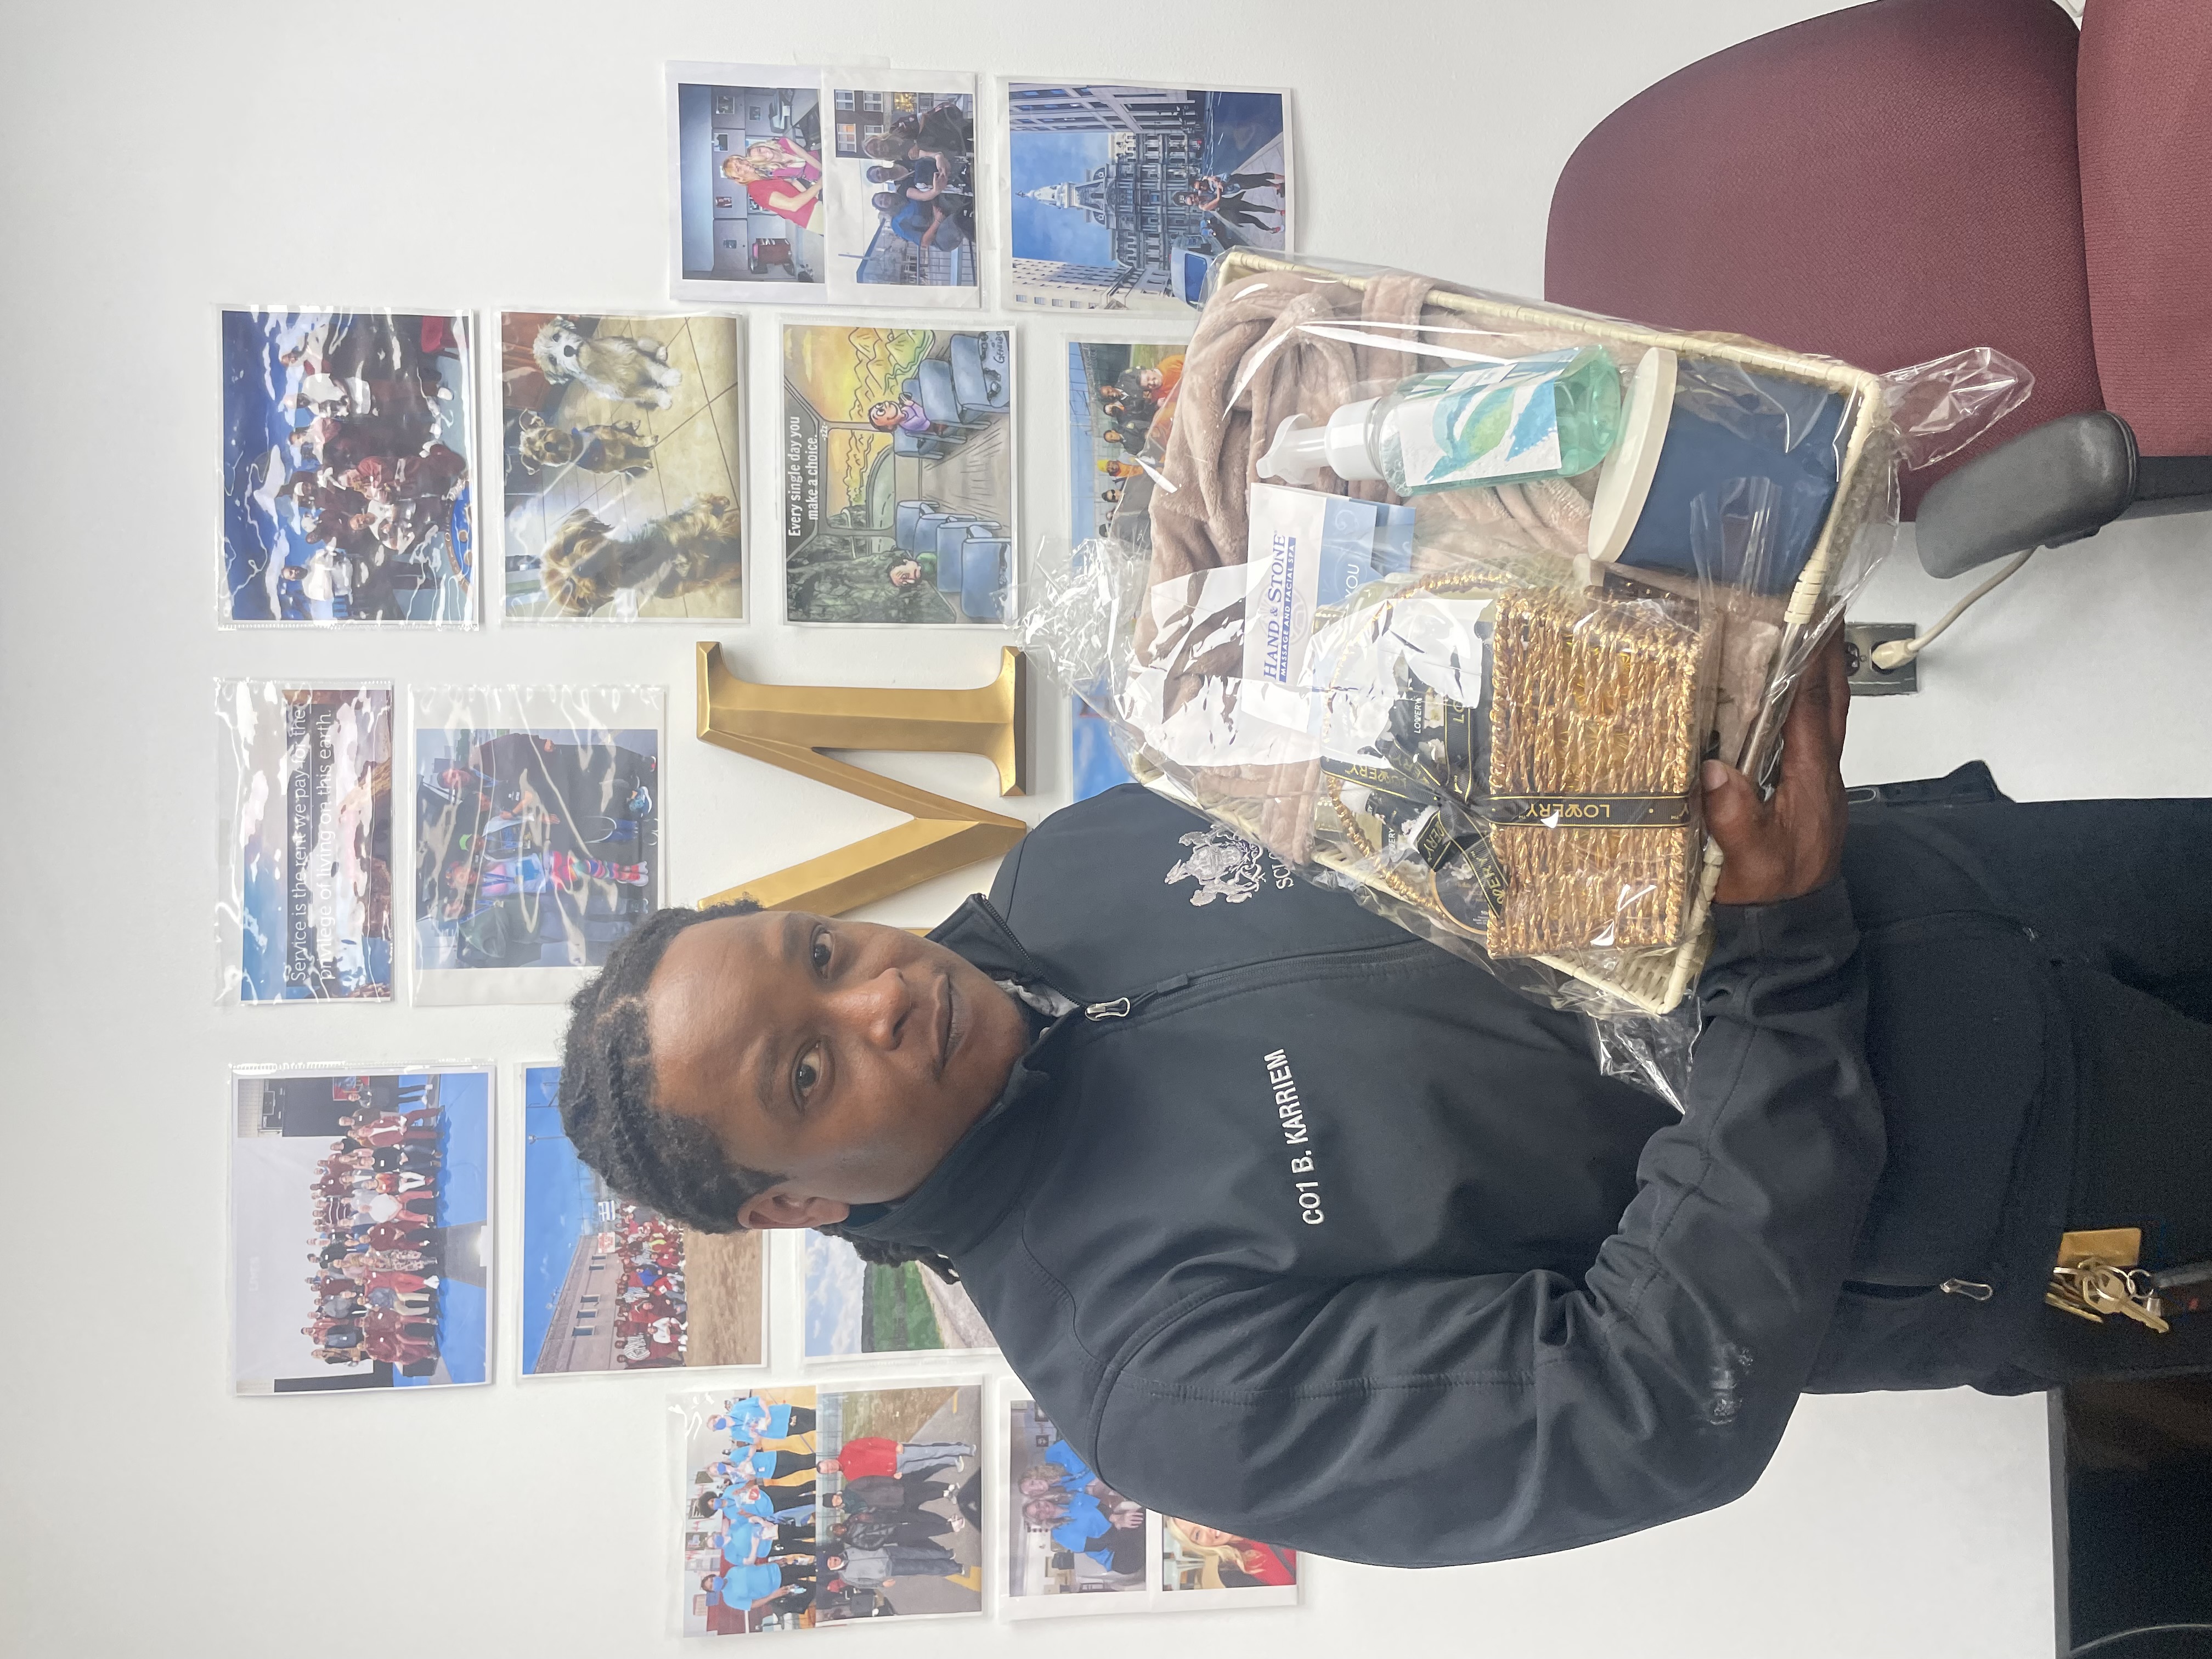 A DOC employee holding a gift basket